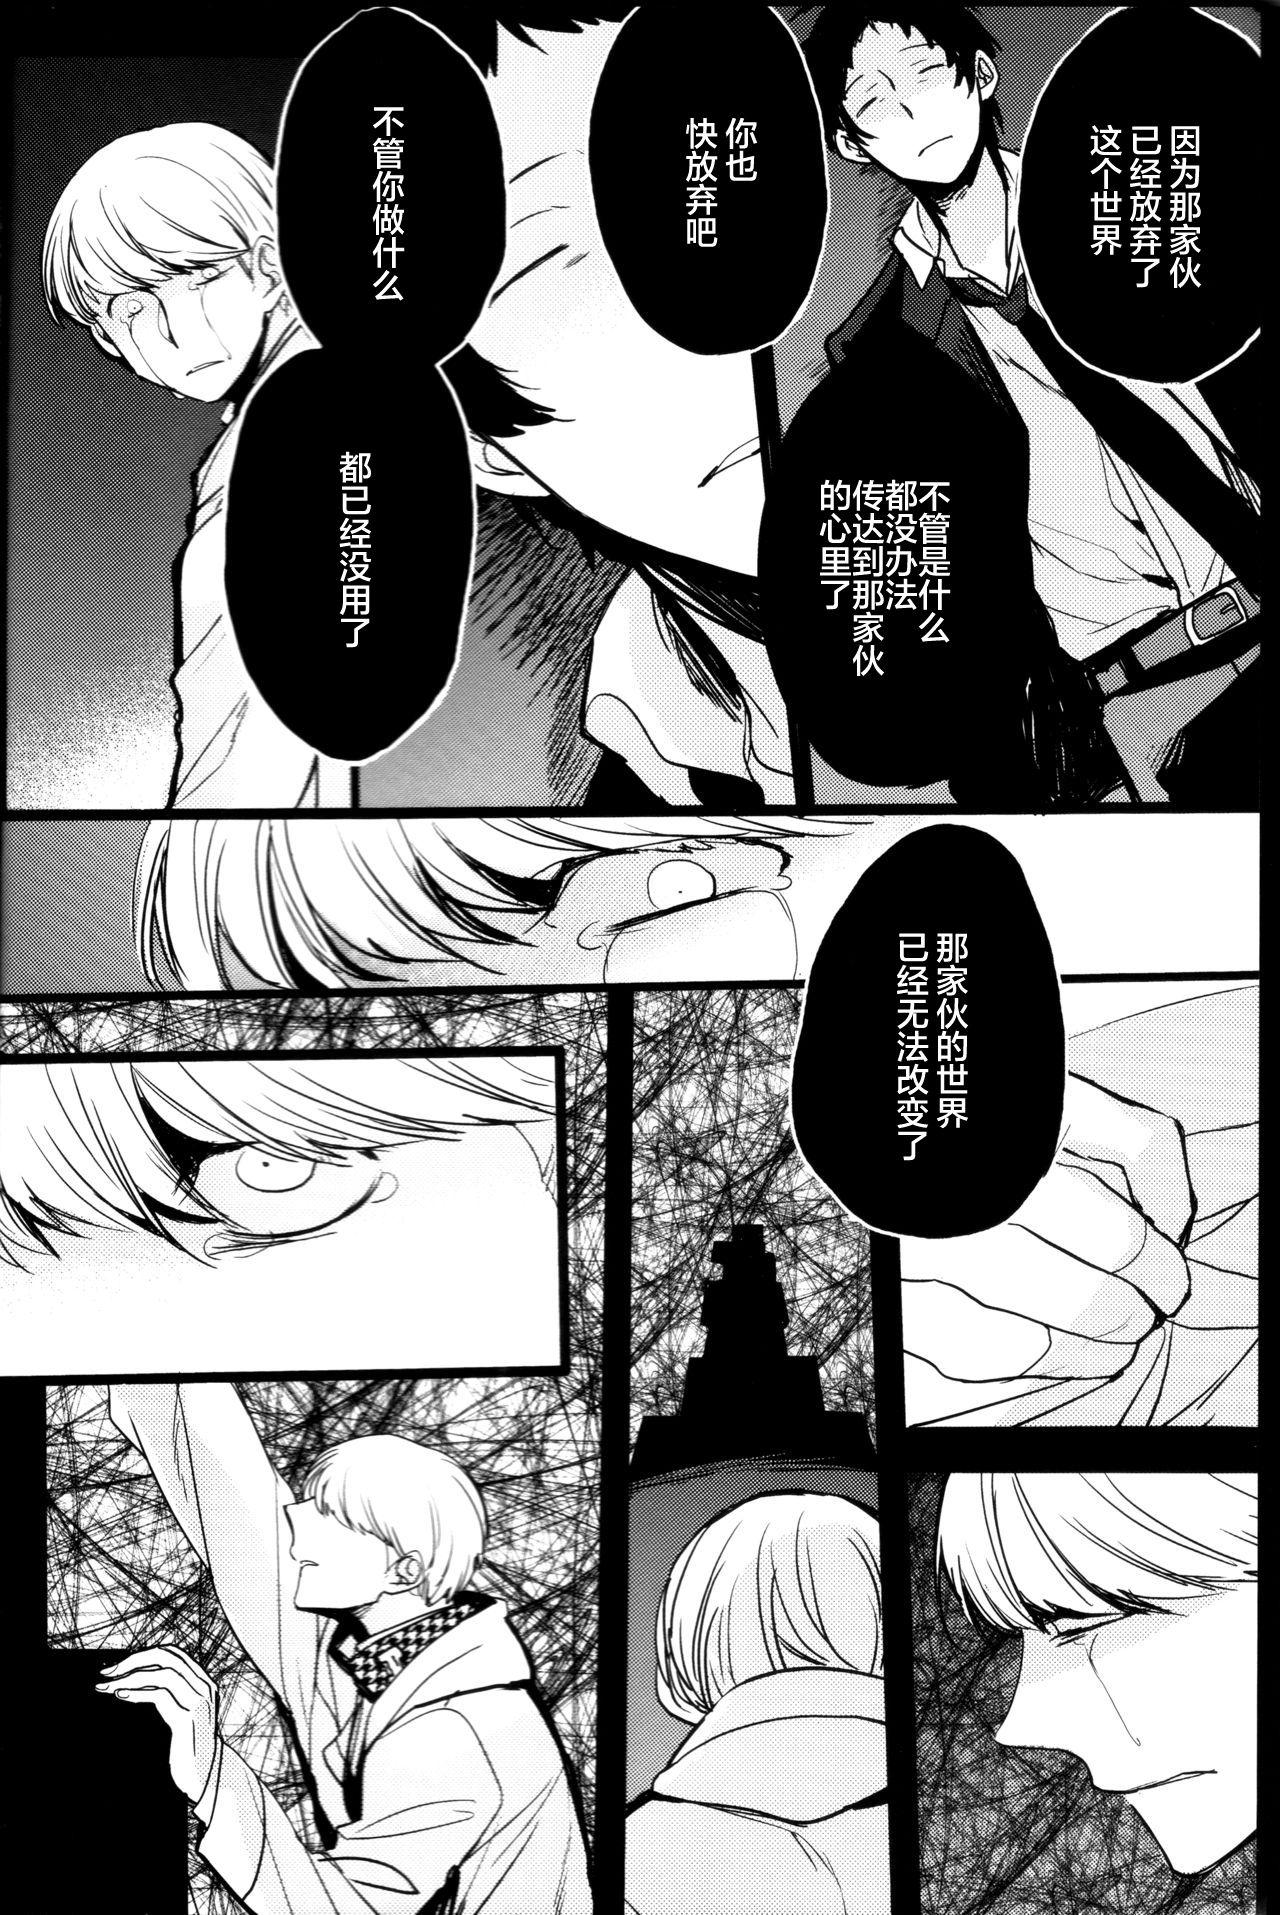 Pussy Sex The End Of The World Volume 3 - Persona 4 With - Page 8